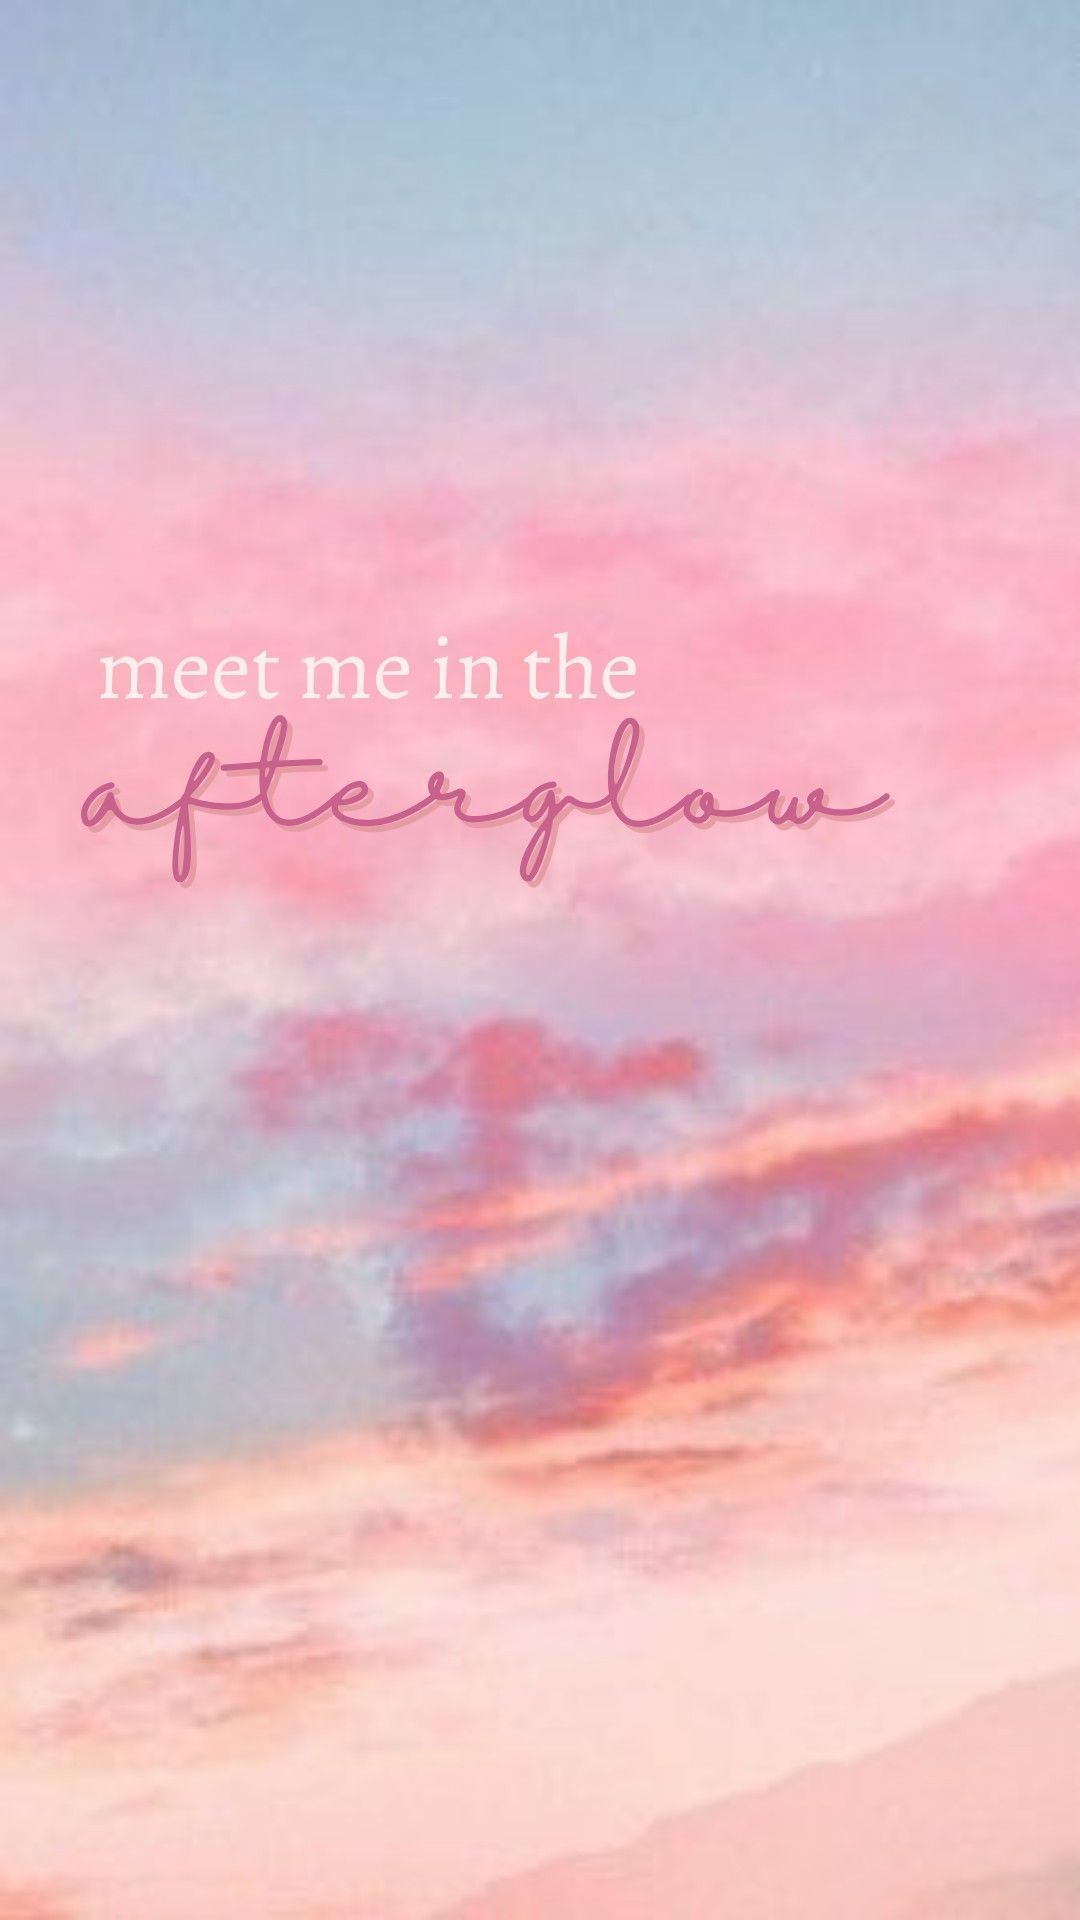 Taylor Swift Lover Afterglow Aesthetic iPhone Wallpaper. Taylor swift lyrics, Taylor swift wallpaper, Taylor swift posters